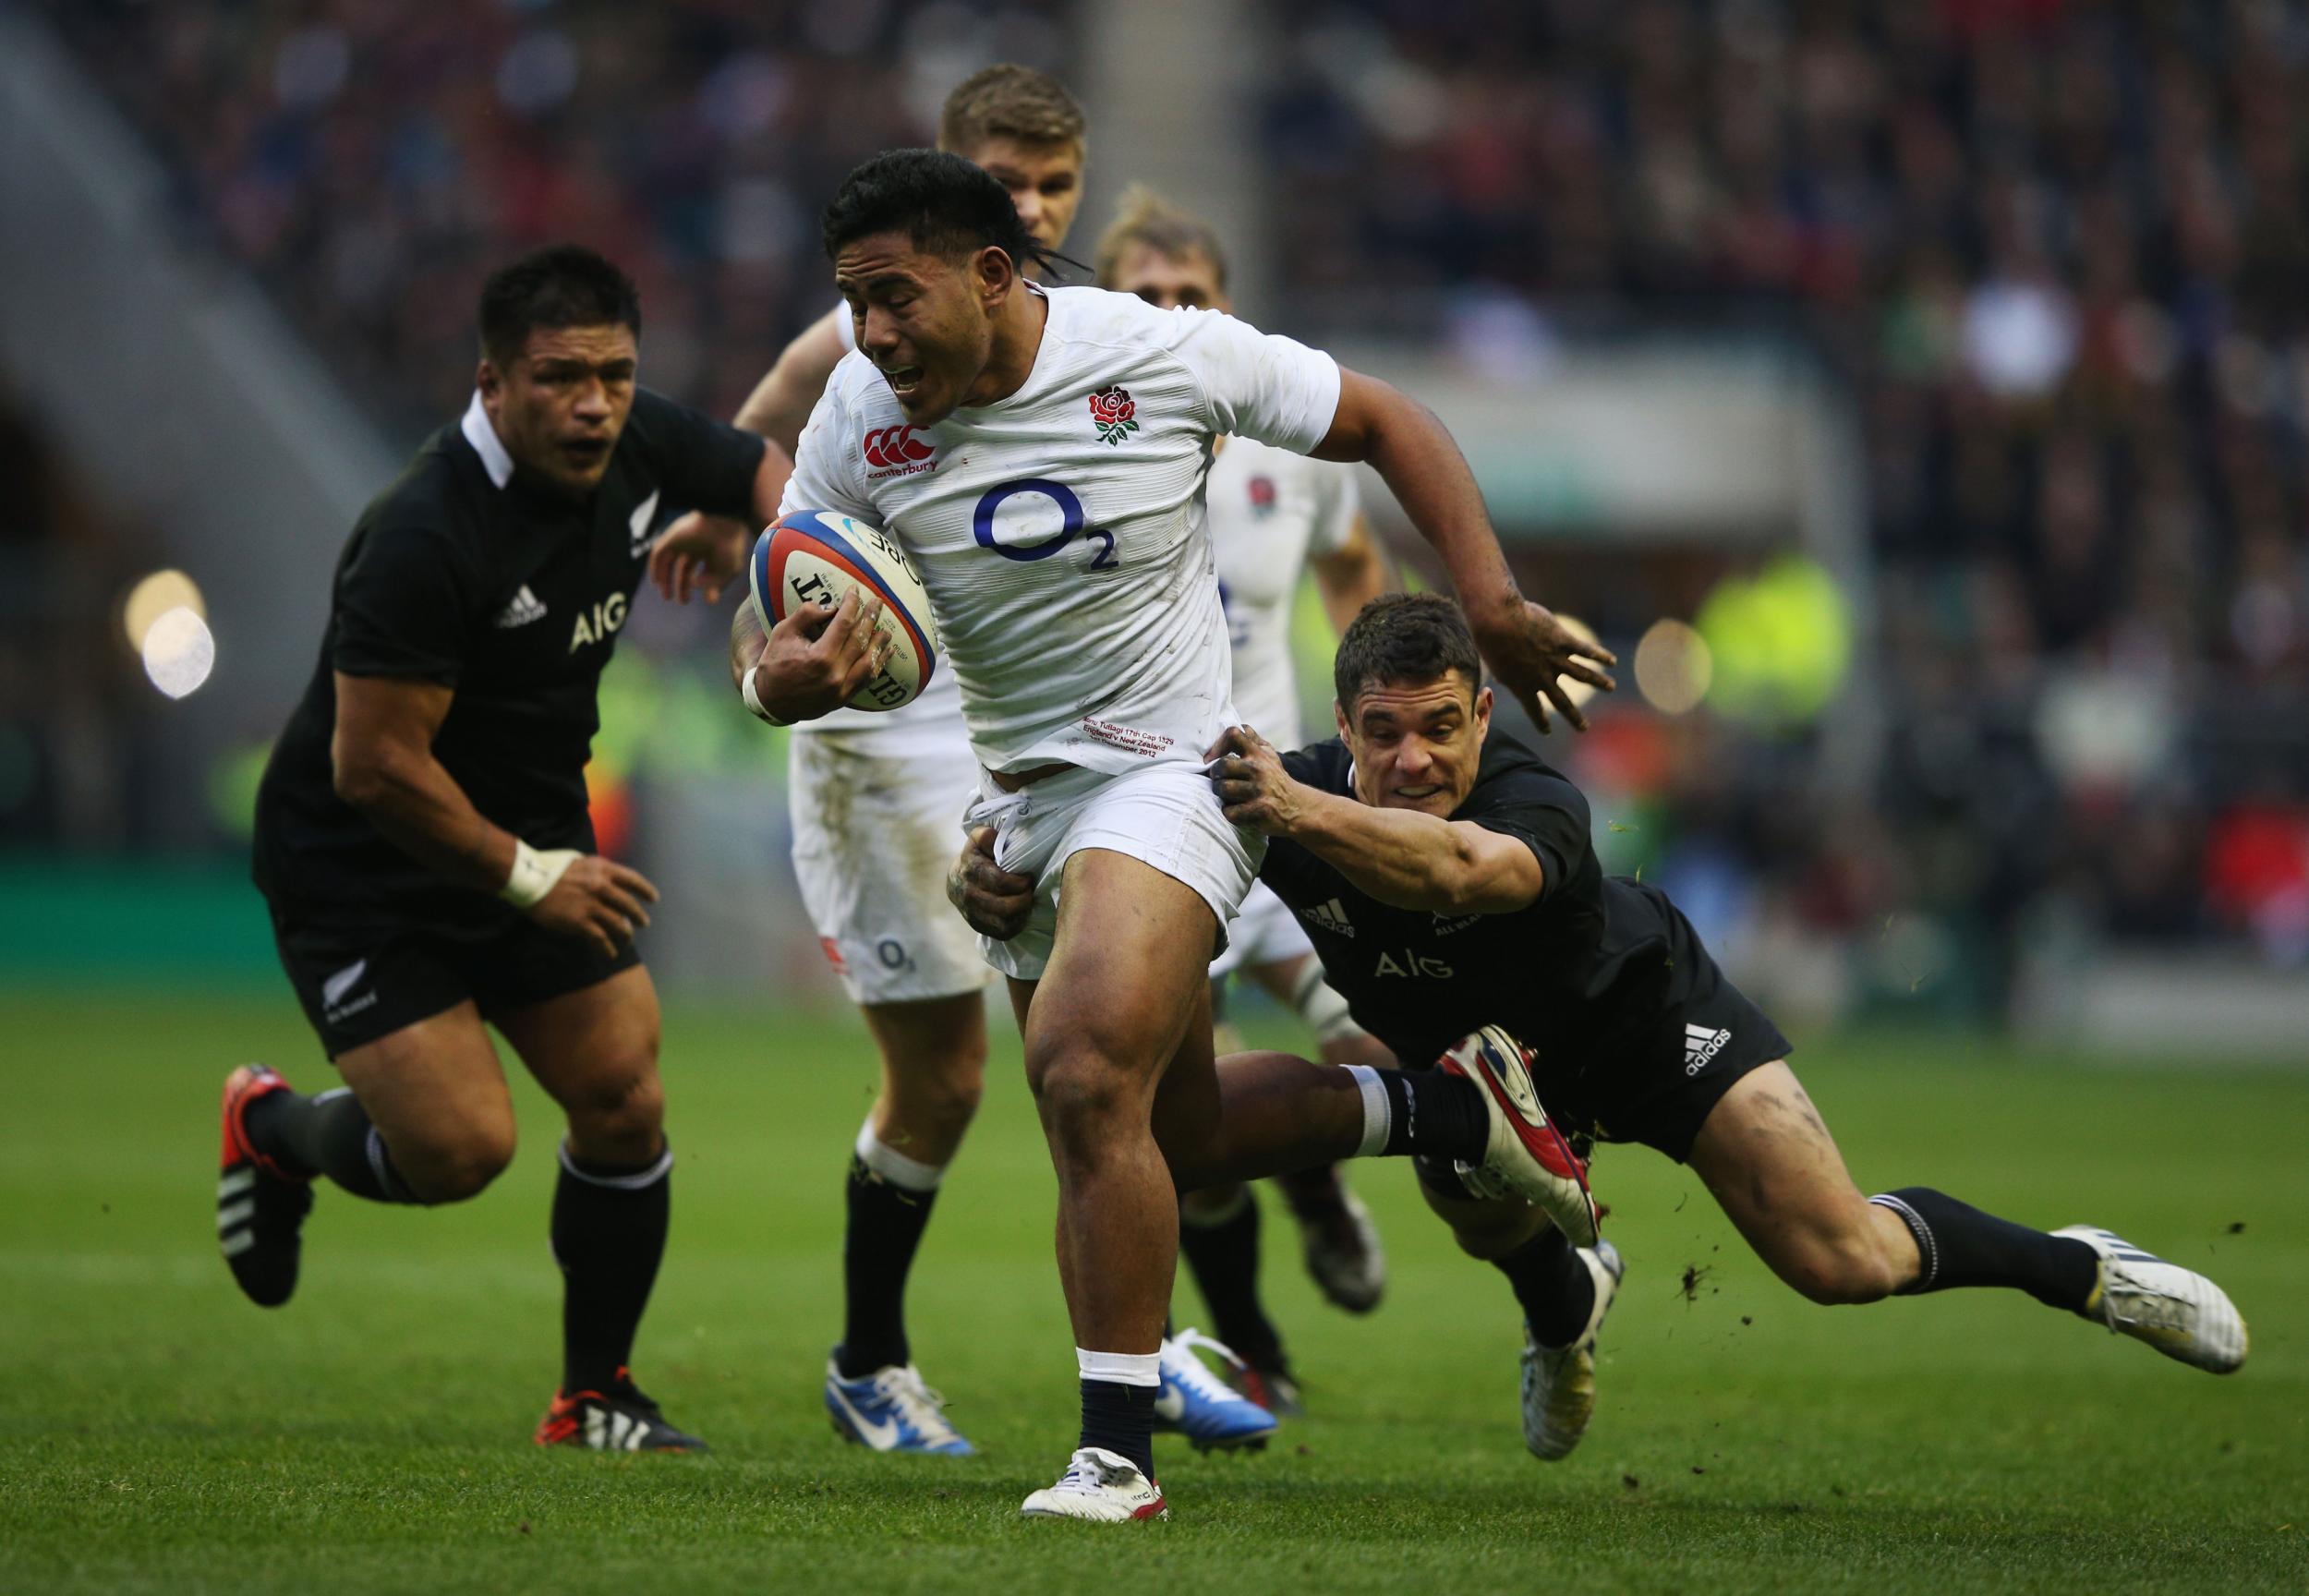 One reason we beat New Zealand in 2012 was Manu Tuilagi - thank god he's on our side this weekend